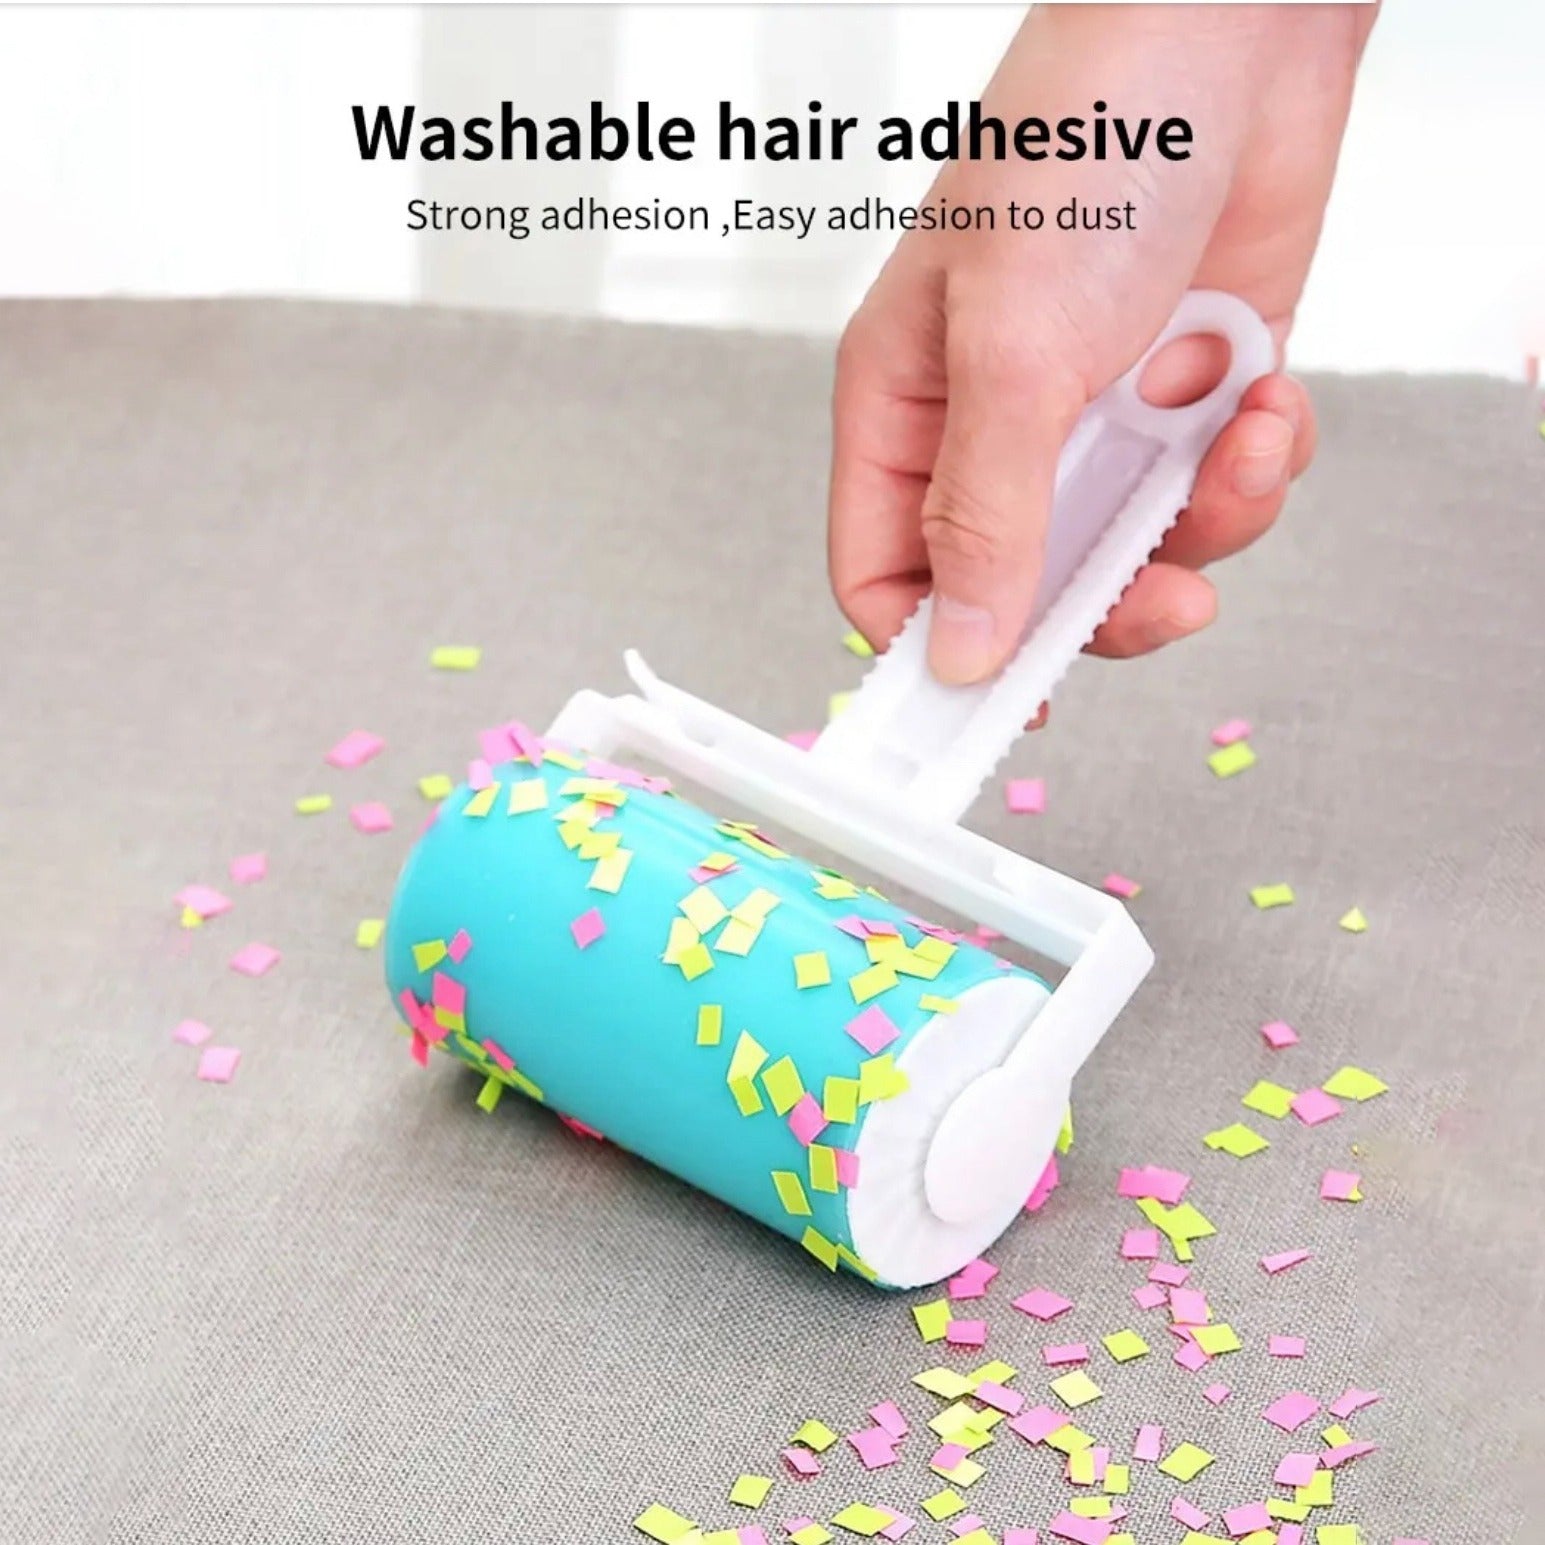 A person rolls confetti on a cloth using a reusable lint remover